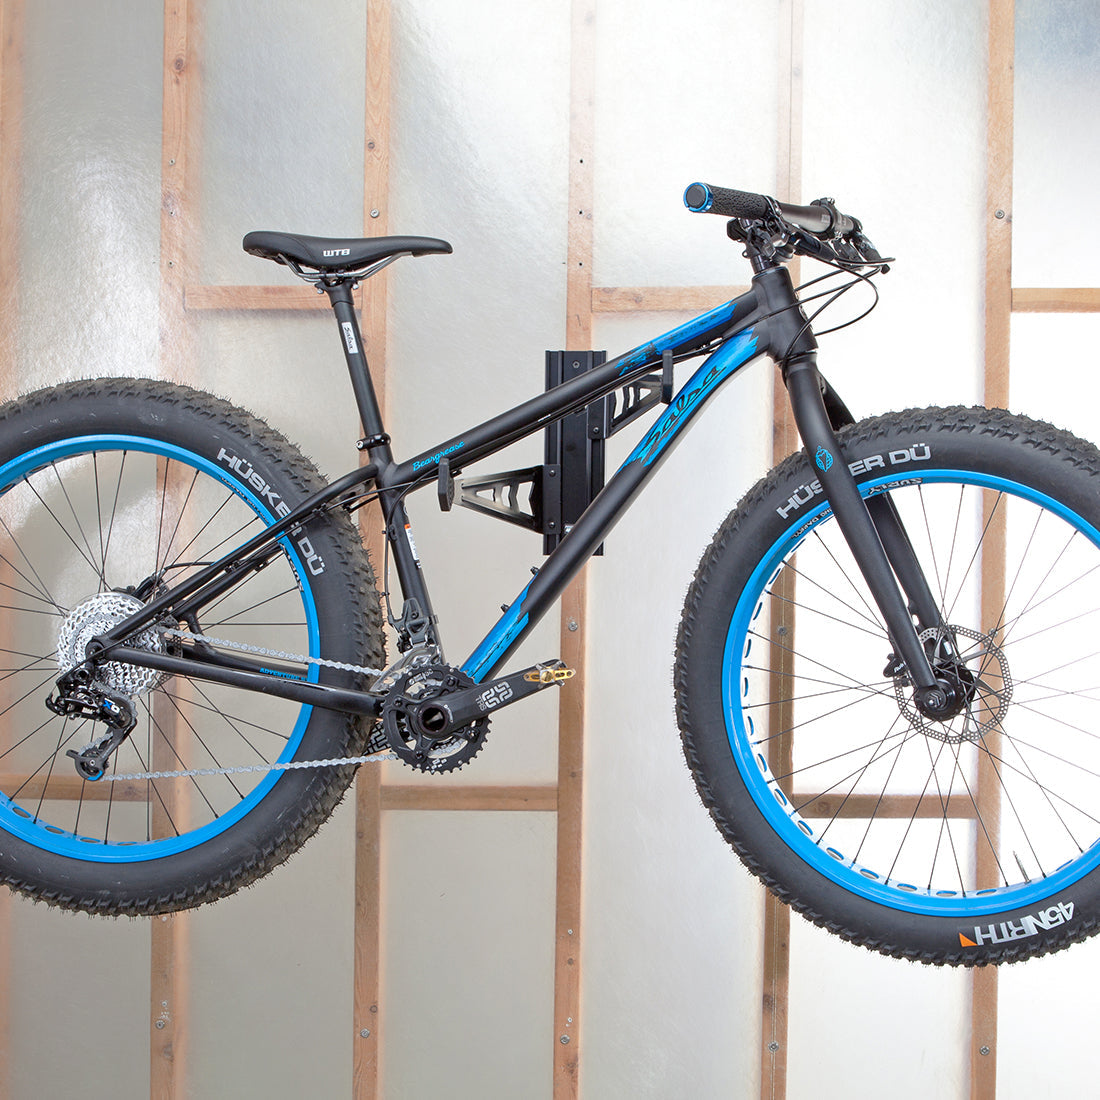 Fat tire mountain bike suspended from wall mount bike storage cradle arms on 2x4 interior wall.